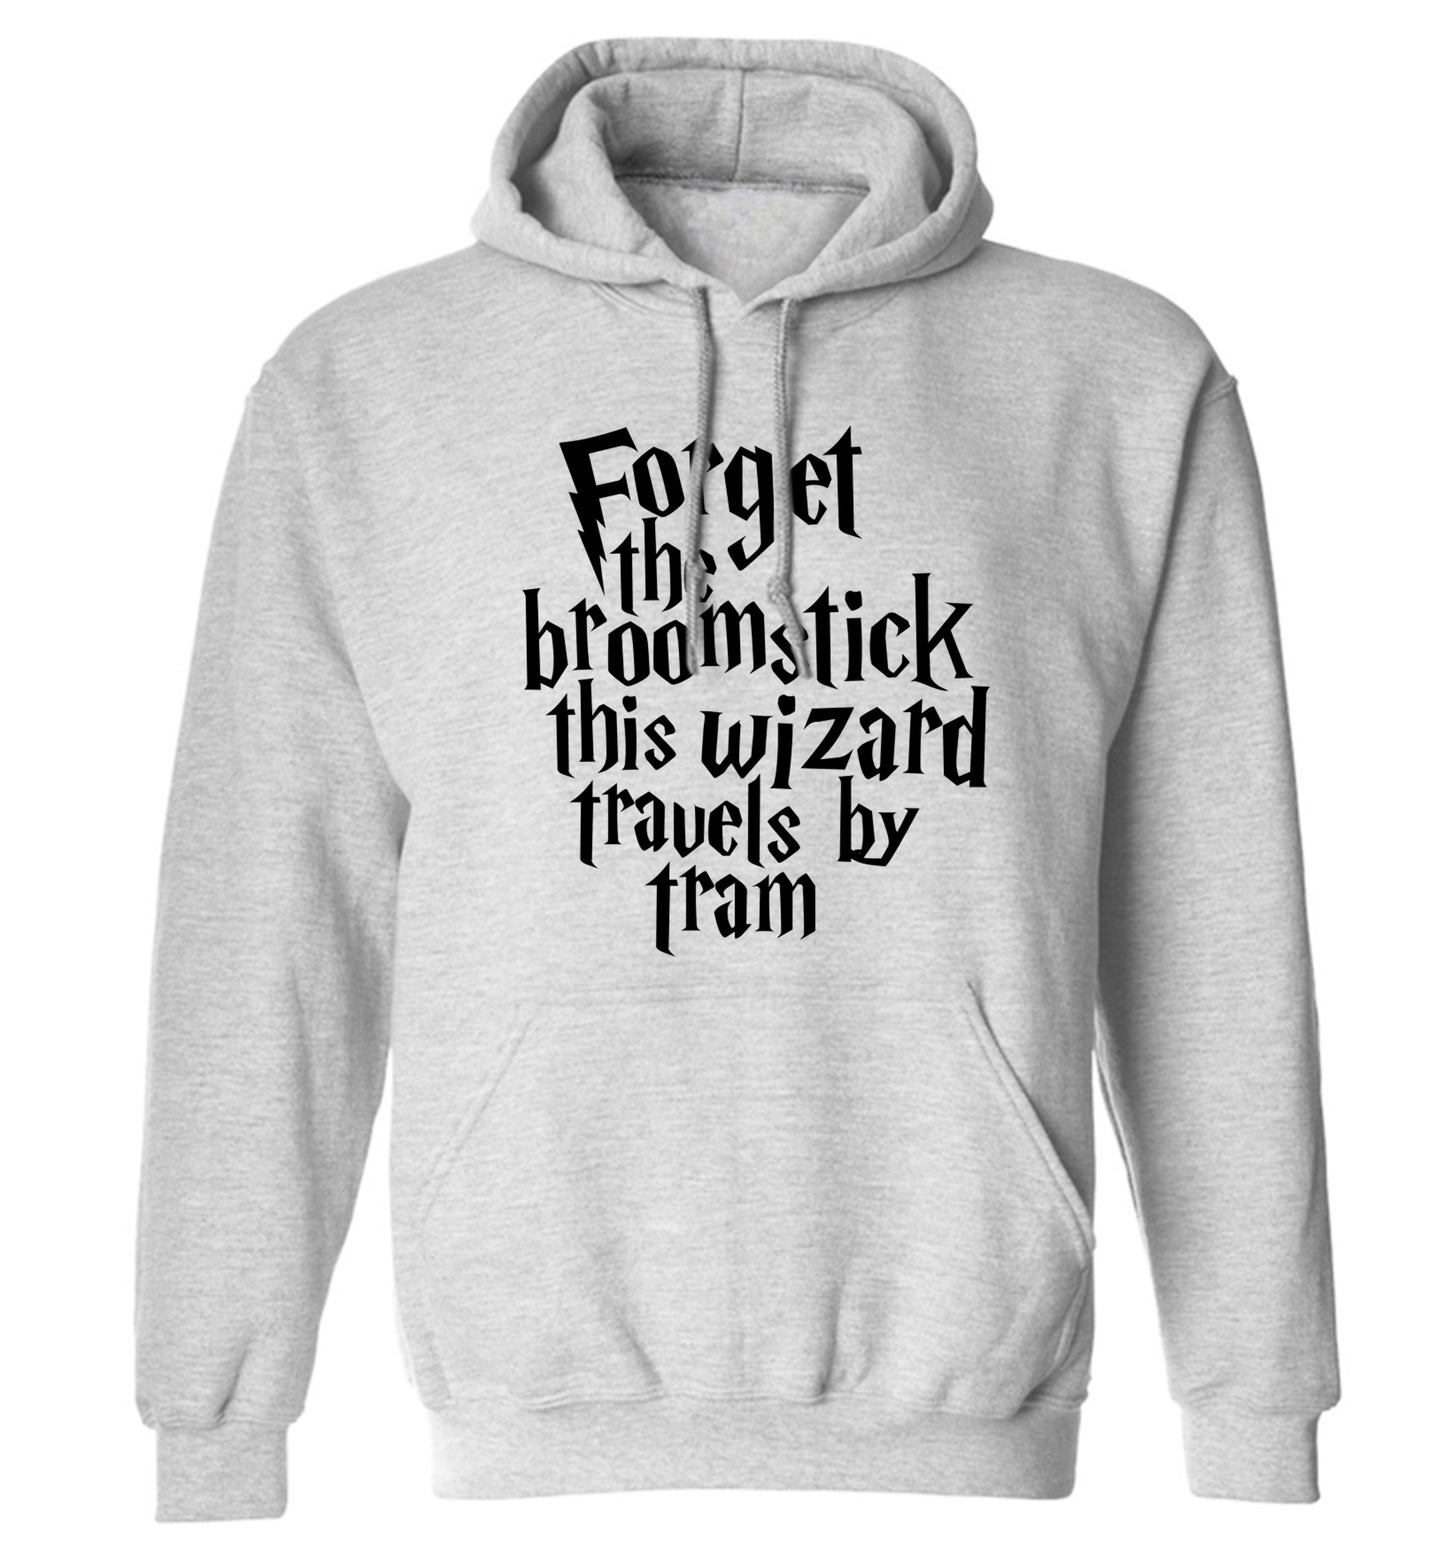 Forget the broomstick this wizard travels by tram adults unisexgrey hoodie 2XL